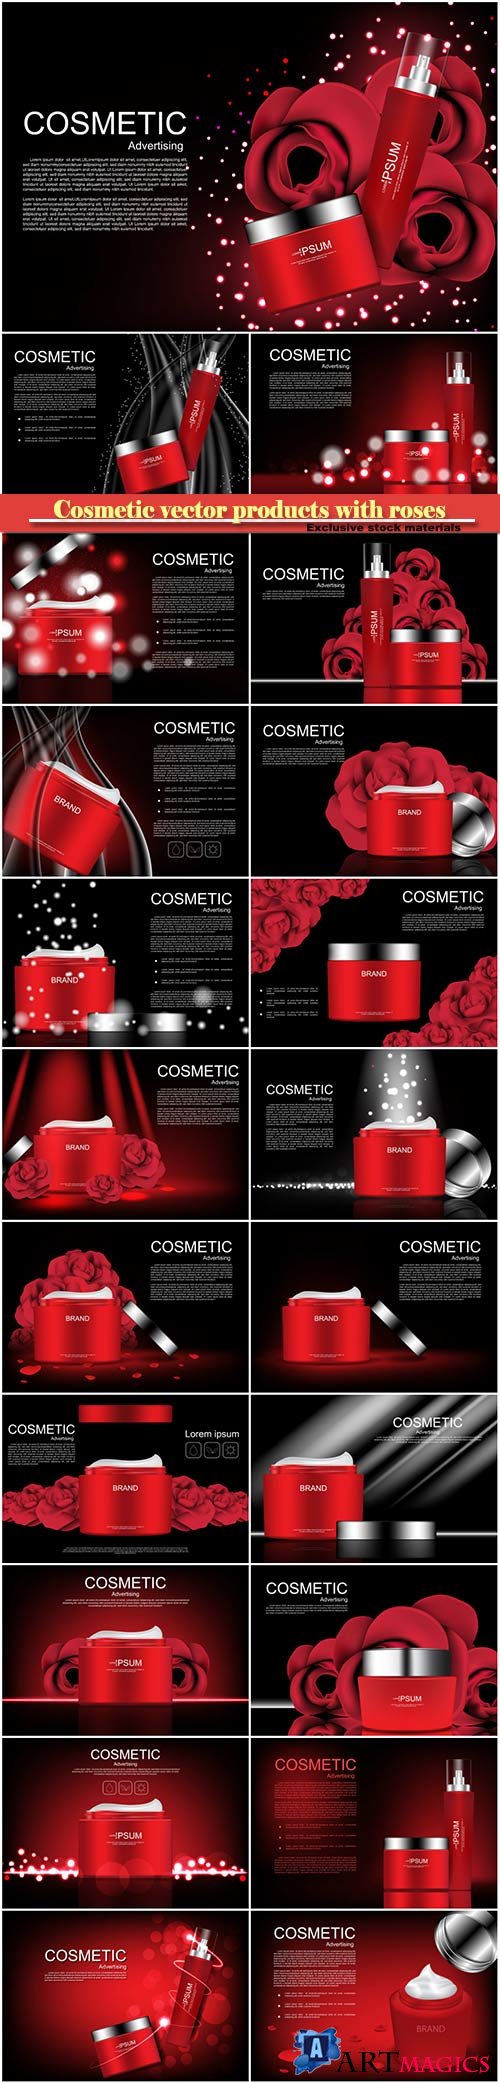 Cosmetic vector products with roses on dark background